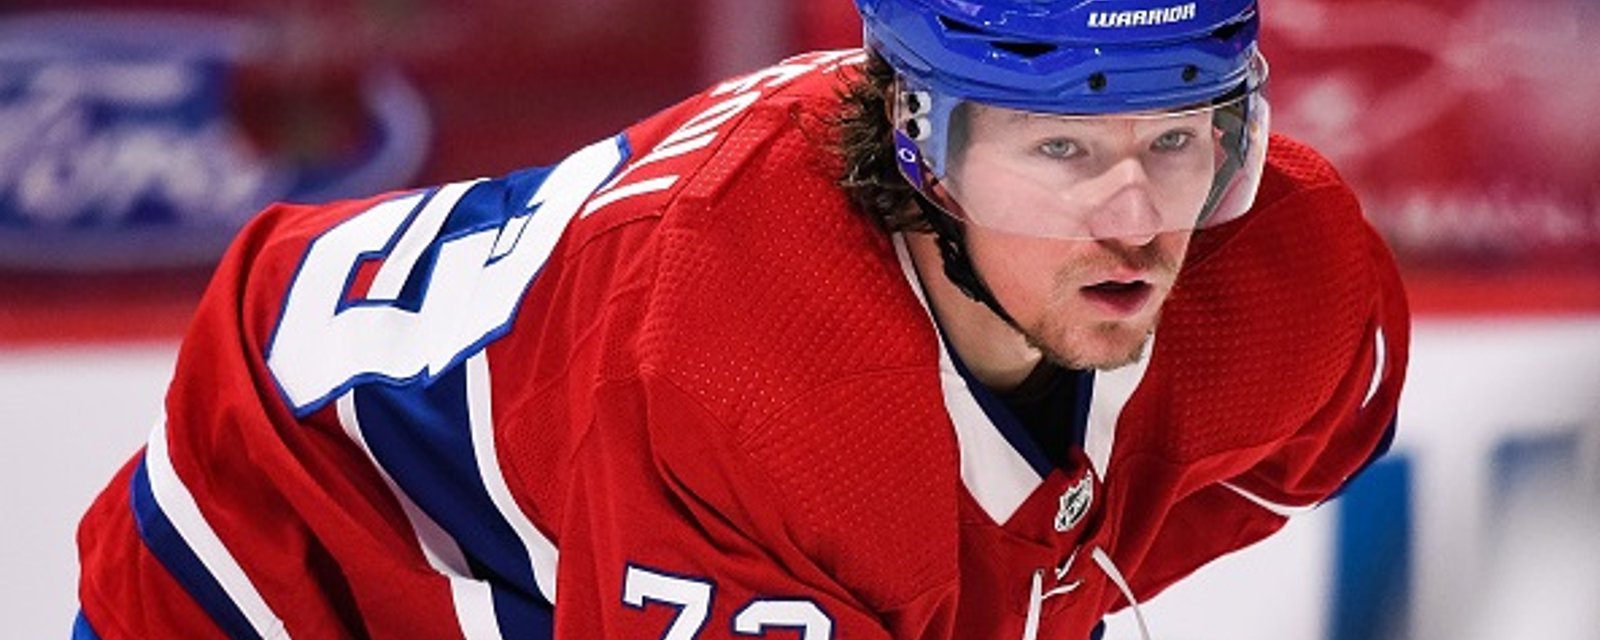 Habs confirm the Tyler Toffoli injury is worse than originally reported.